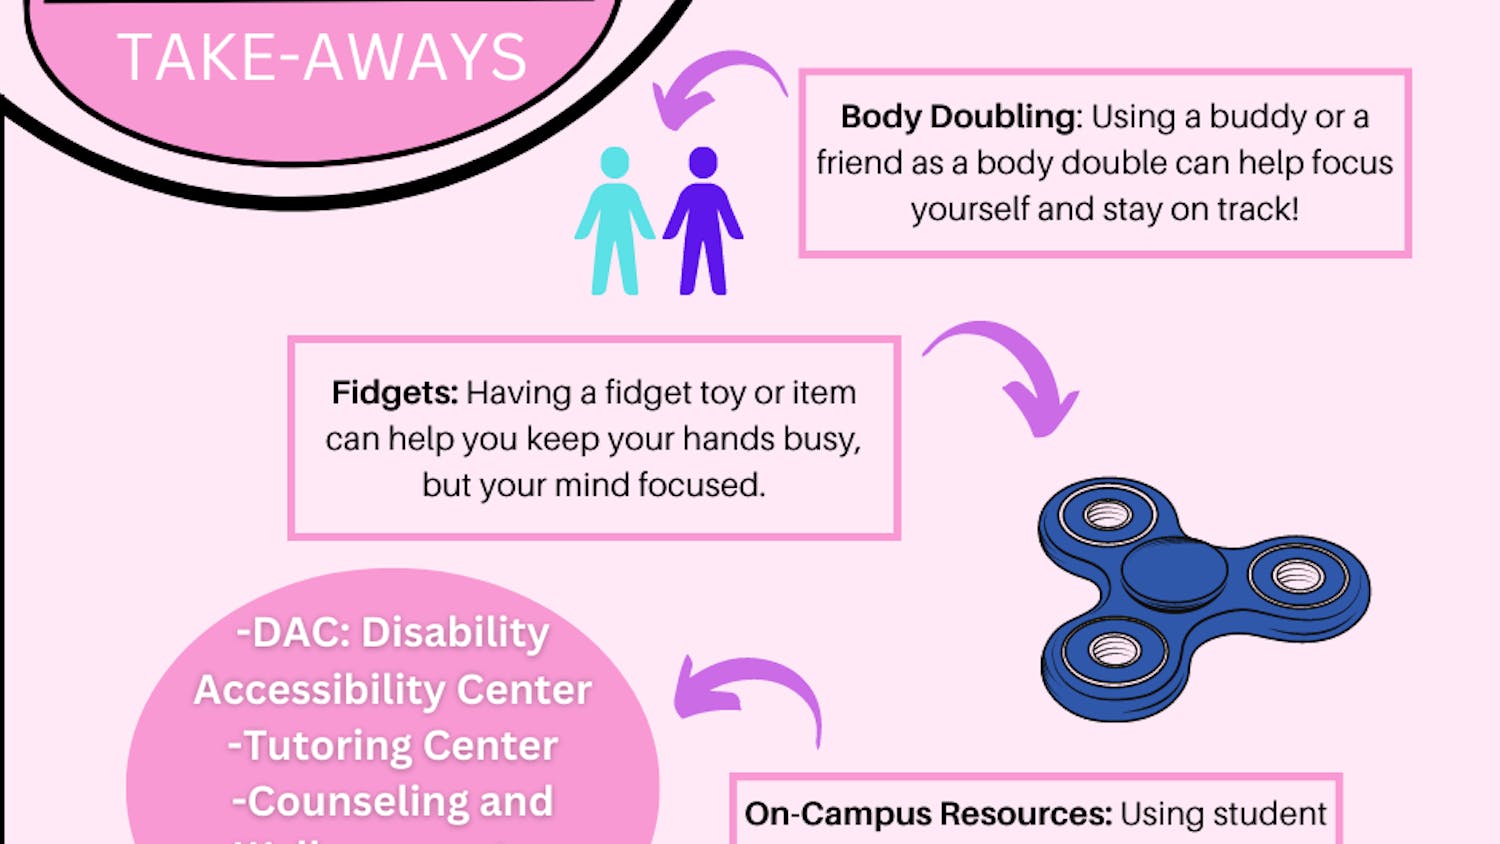 ADHD Survival Tips -DAC Disability Accessibility Center -Tutoring Center -Counseling and Wellness center -Distracted Vikings Club TAKE-AWAYS.png